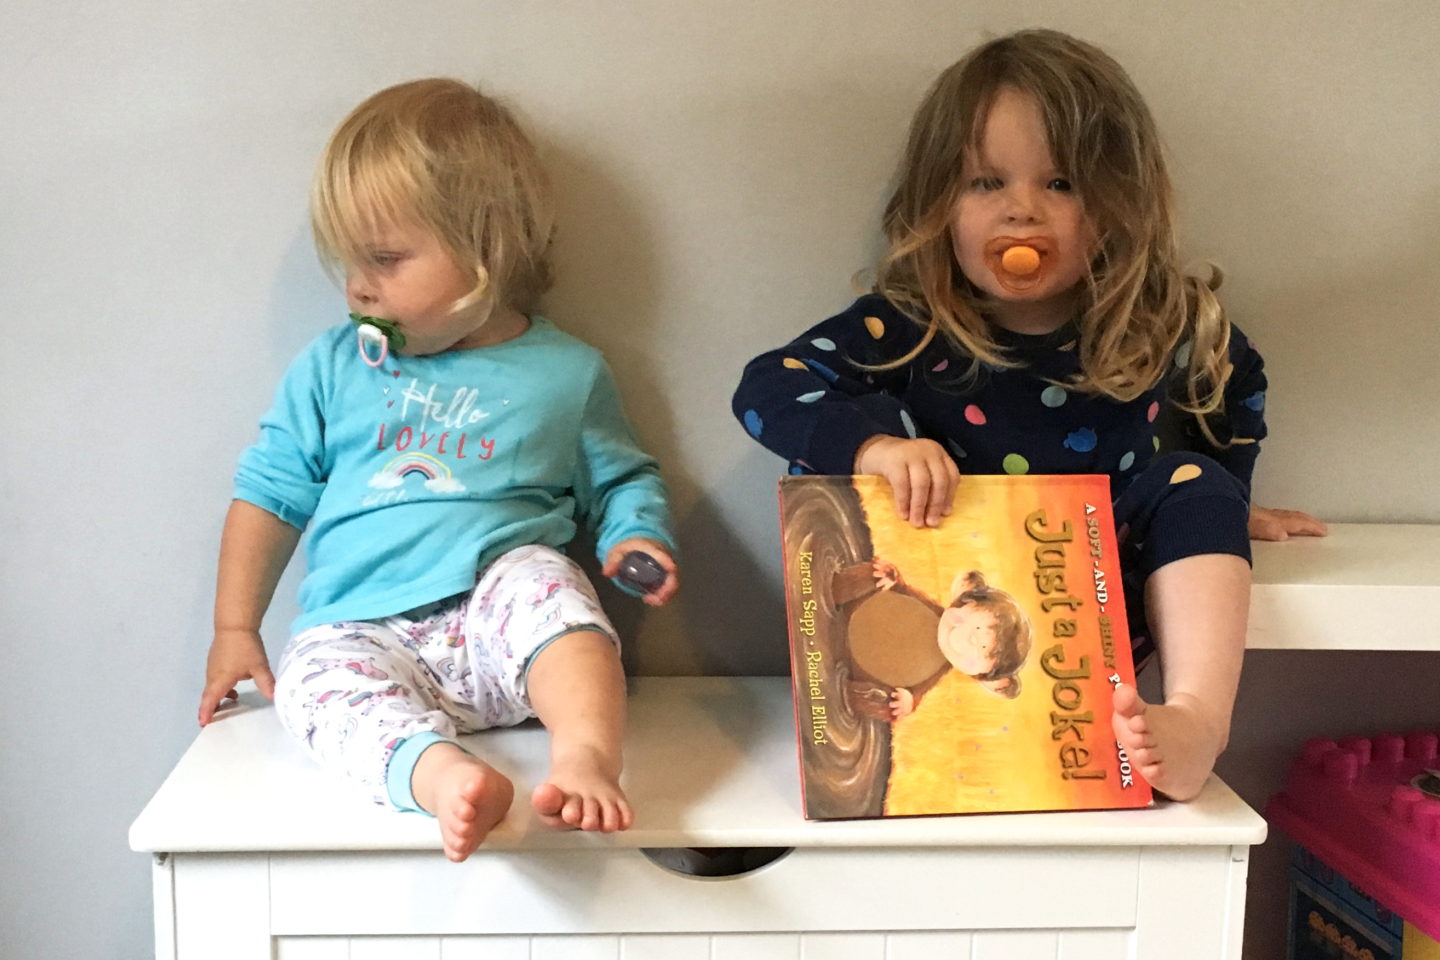 two sisters sitting on a toy box in their pyjamas